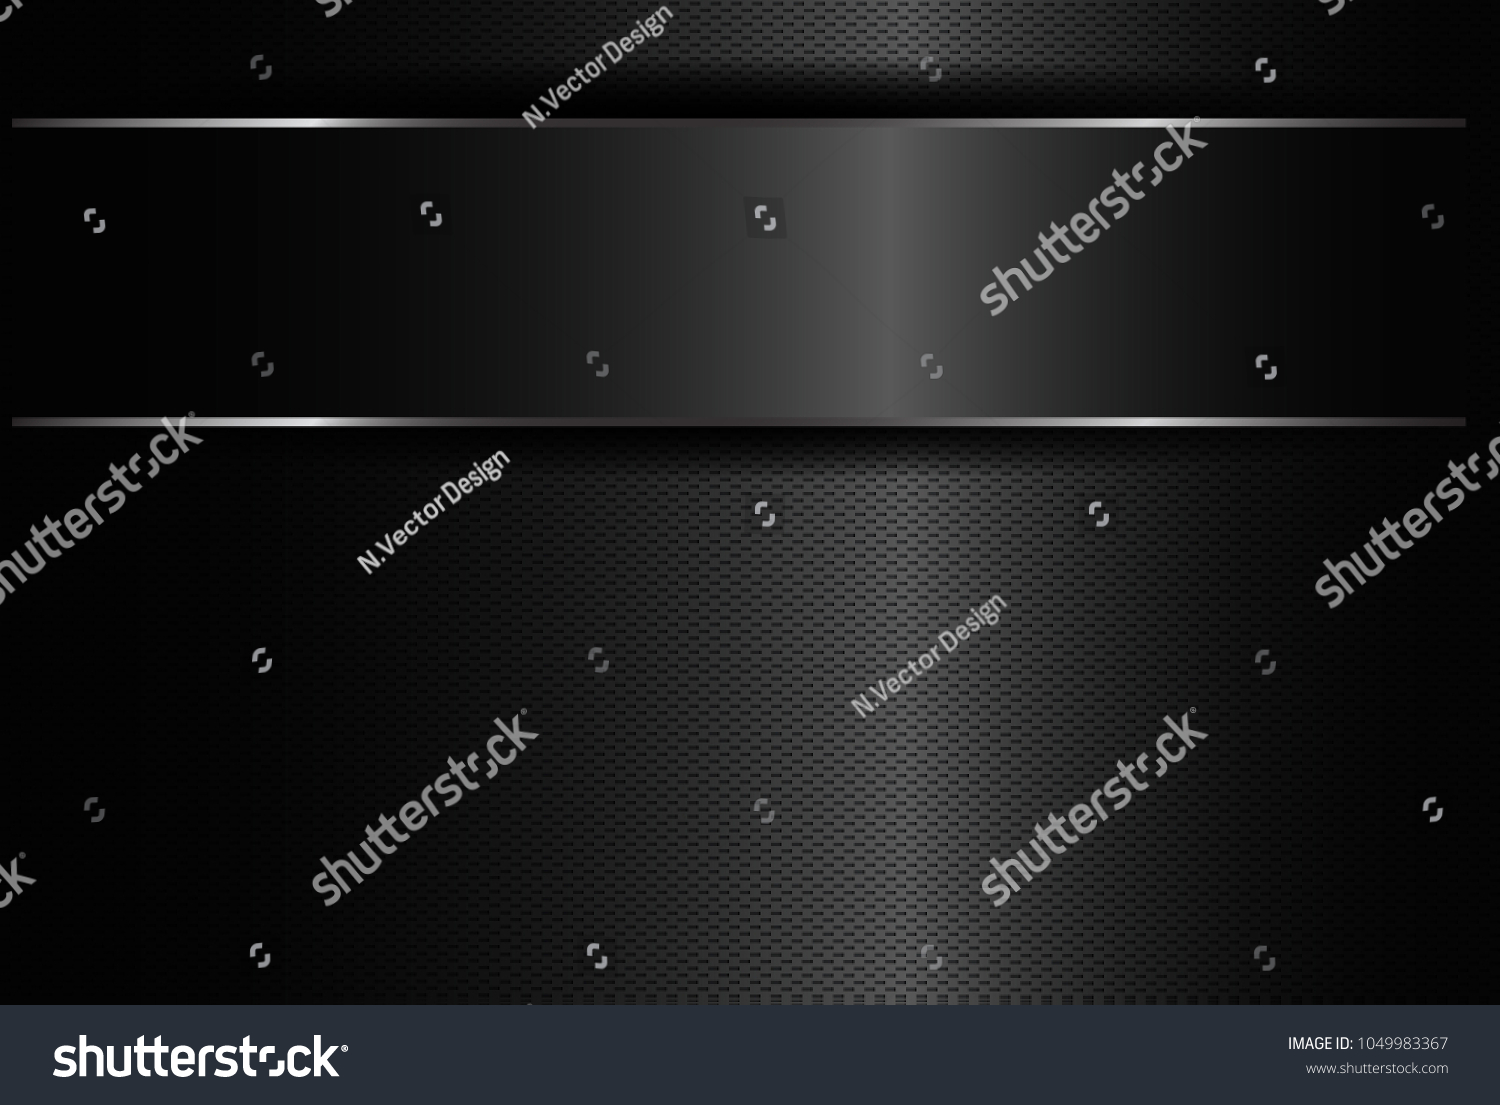 Metallic background polished steel texture, vector design , abstract metallic frame design innovation concept layout background, eps10. #1049983367